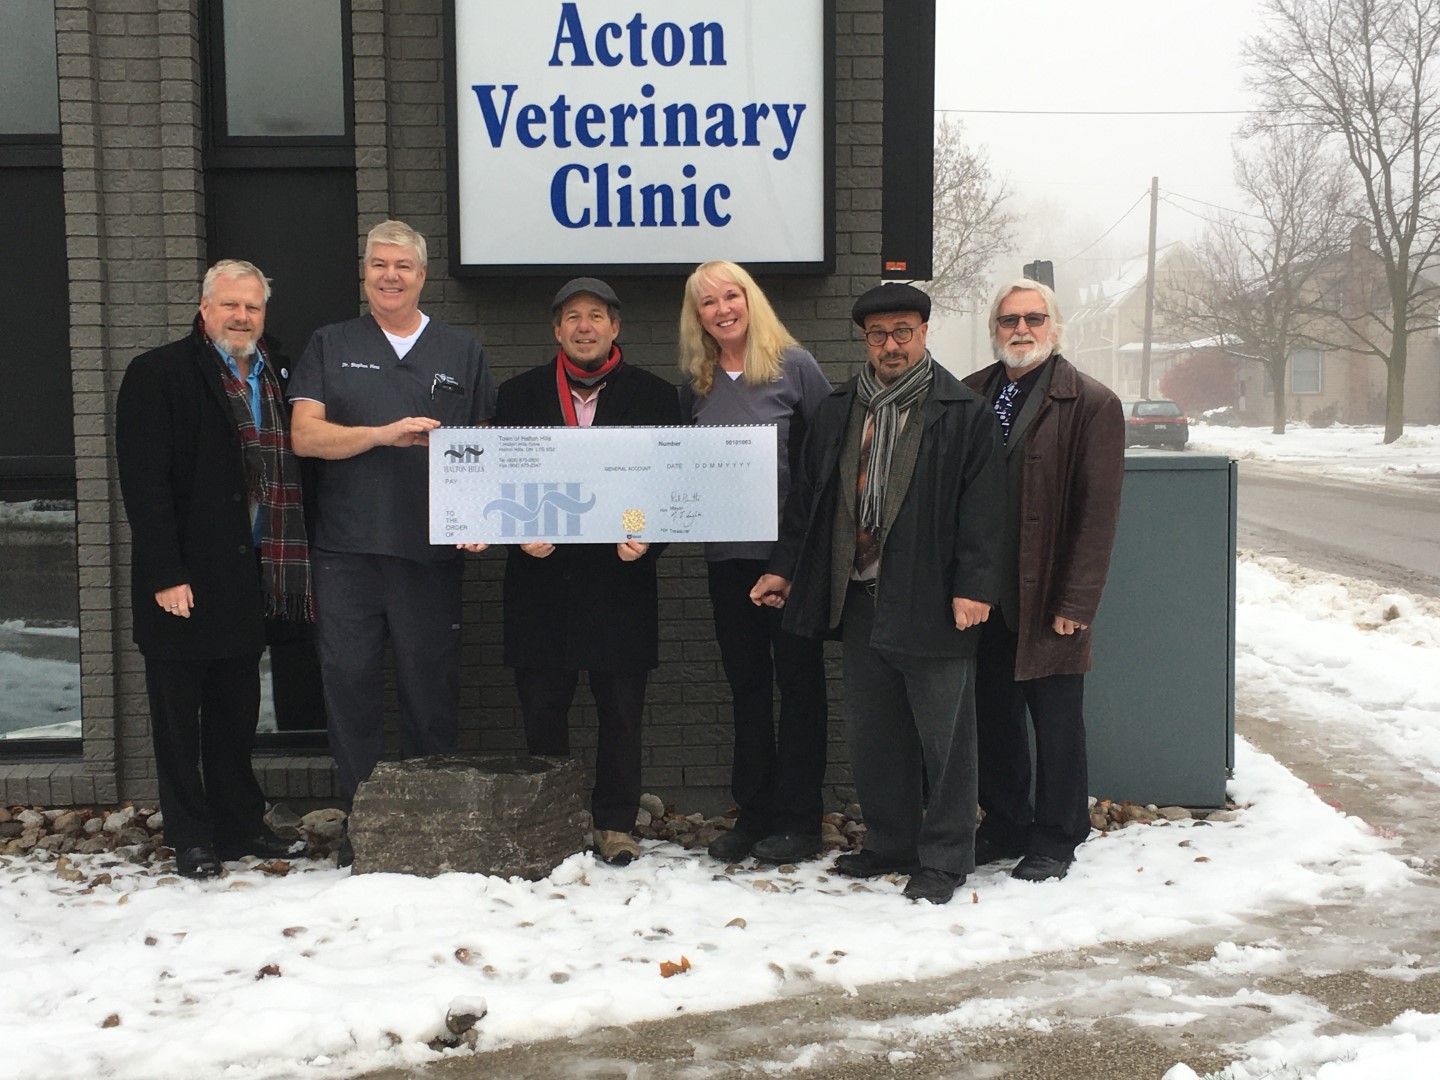 cheque presentation in front of Acton Vet